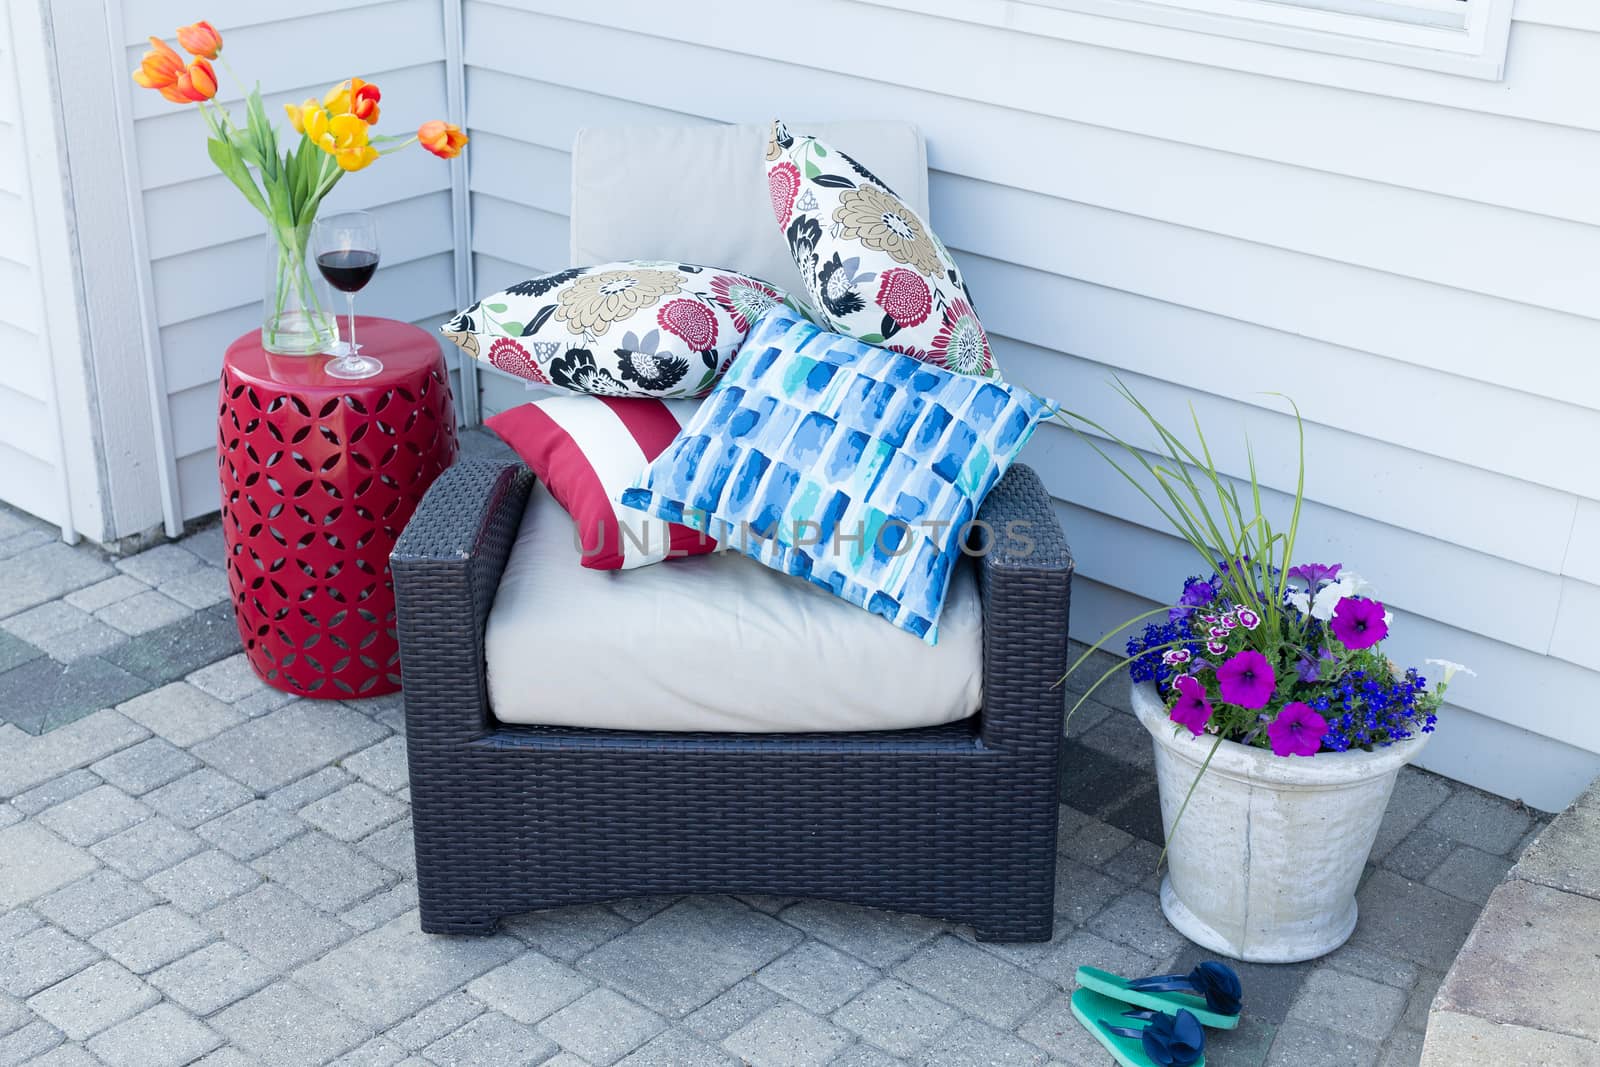 Pile of colorful cushions on a comfortable outdoor armchair flanked with fresh spring tulips and flowers for a relaxing place to enjoy a shady break on a hot day